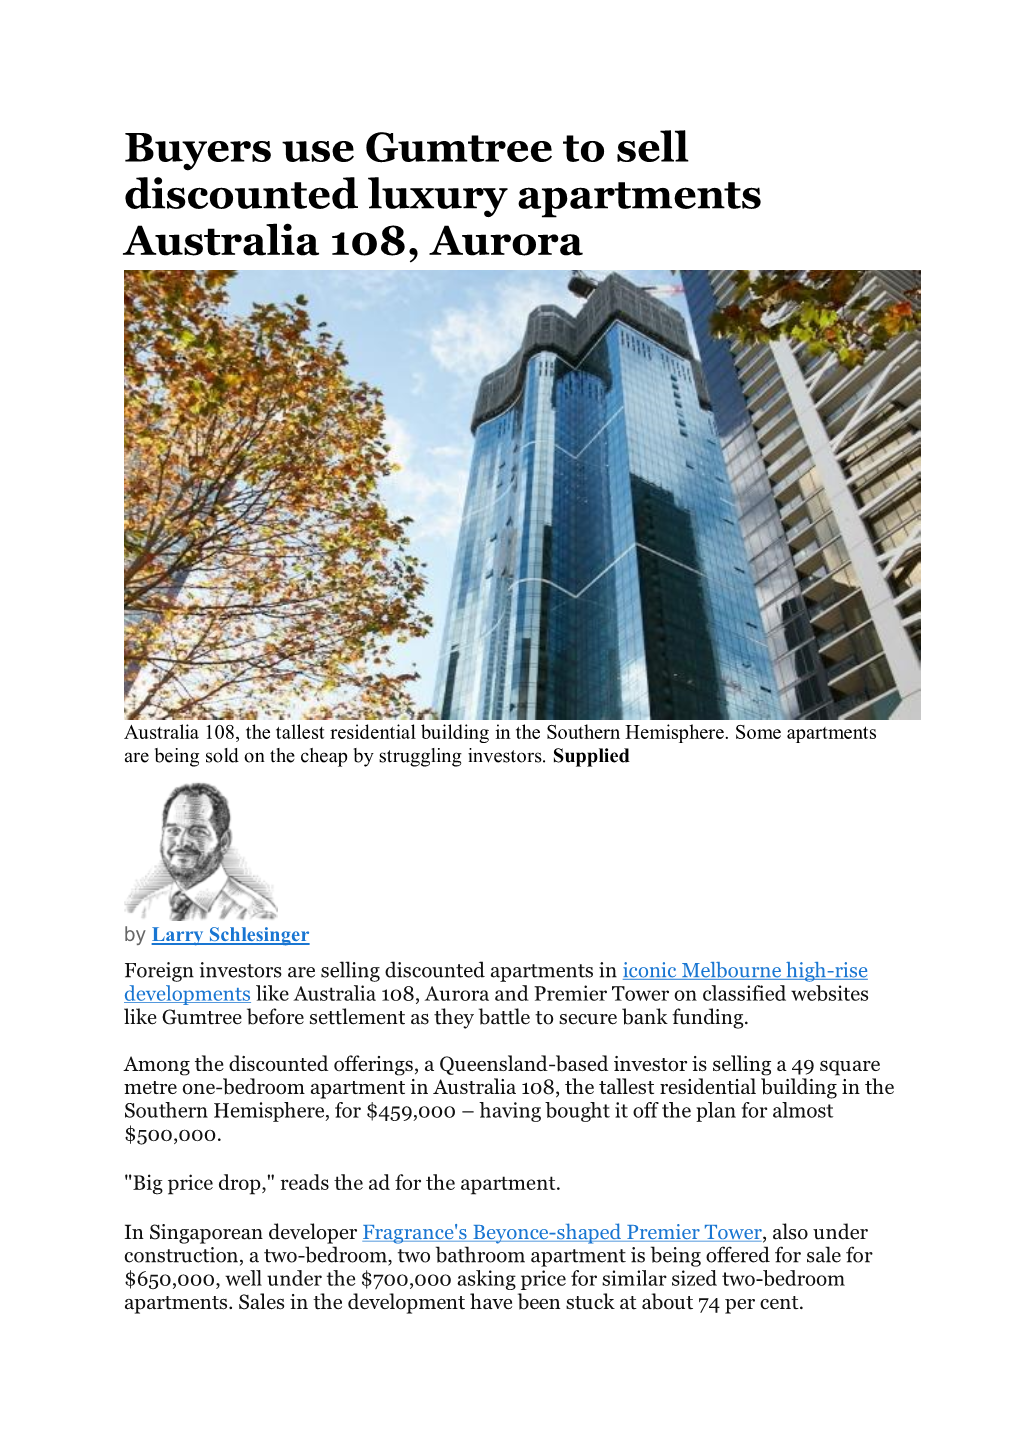 Buyers Use Gumtree to Sell Discounted Luxury Apartments Australia 108, Aurora